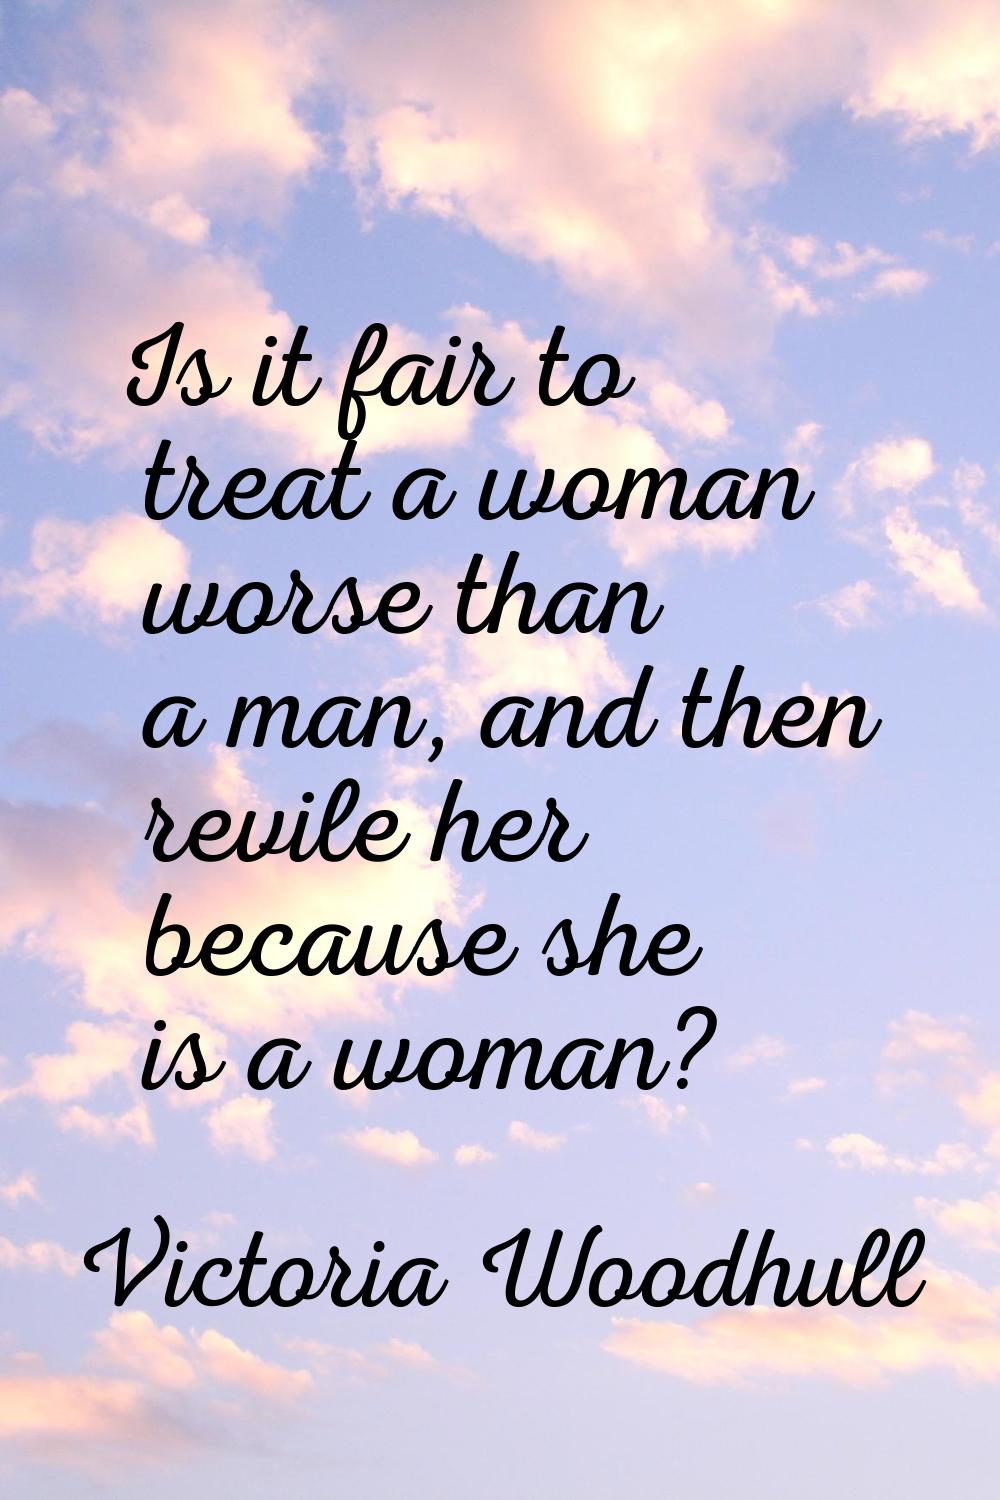 Is it fair to treat a woman worse than a man, and then revile her because she is a woman?